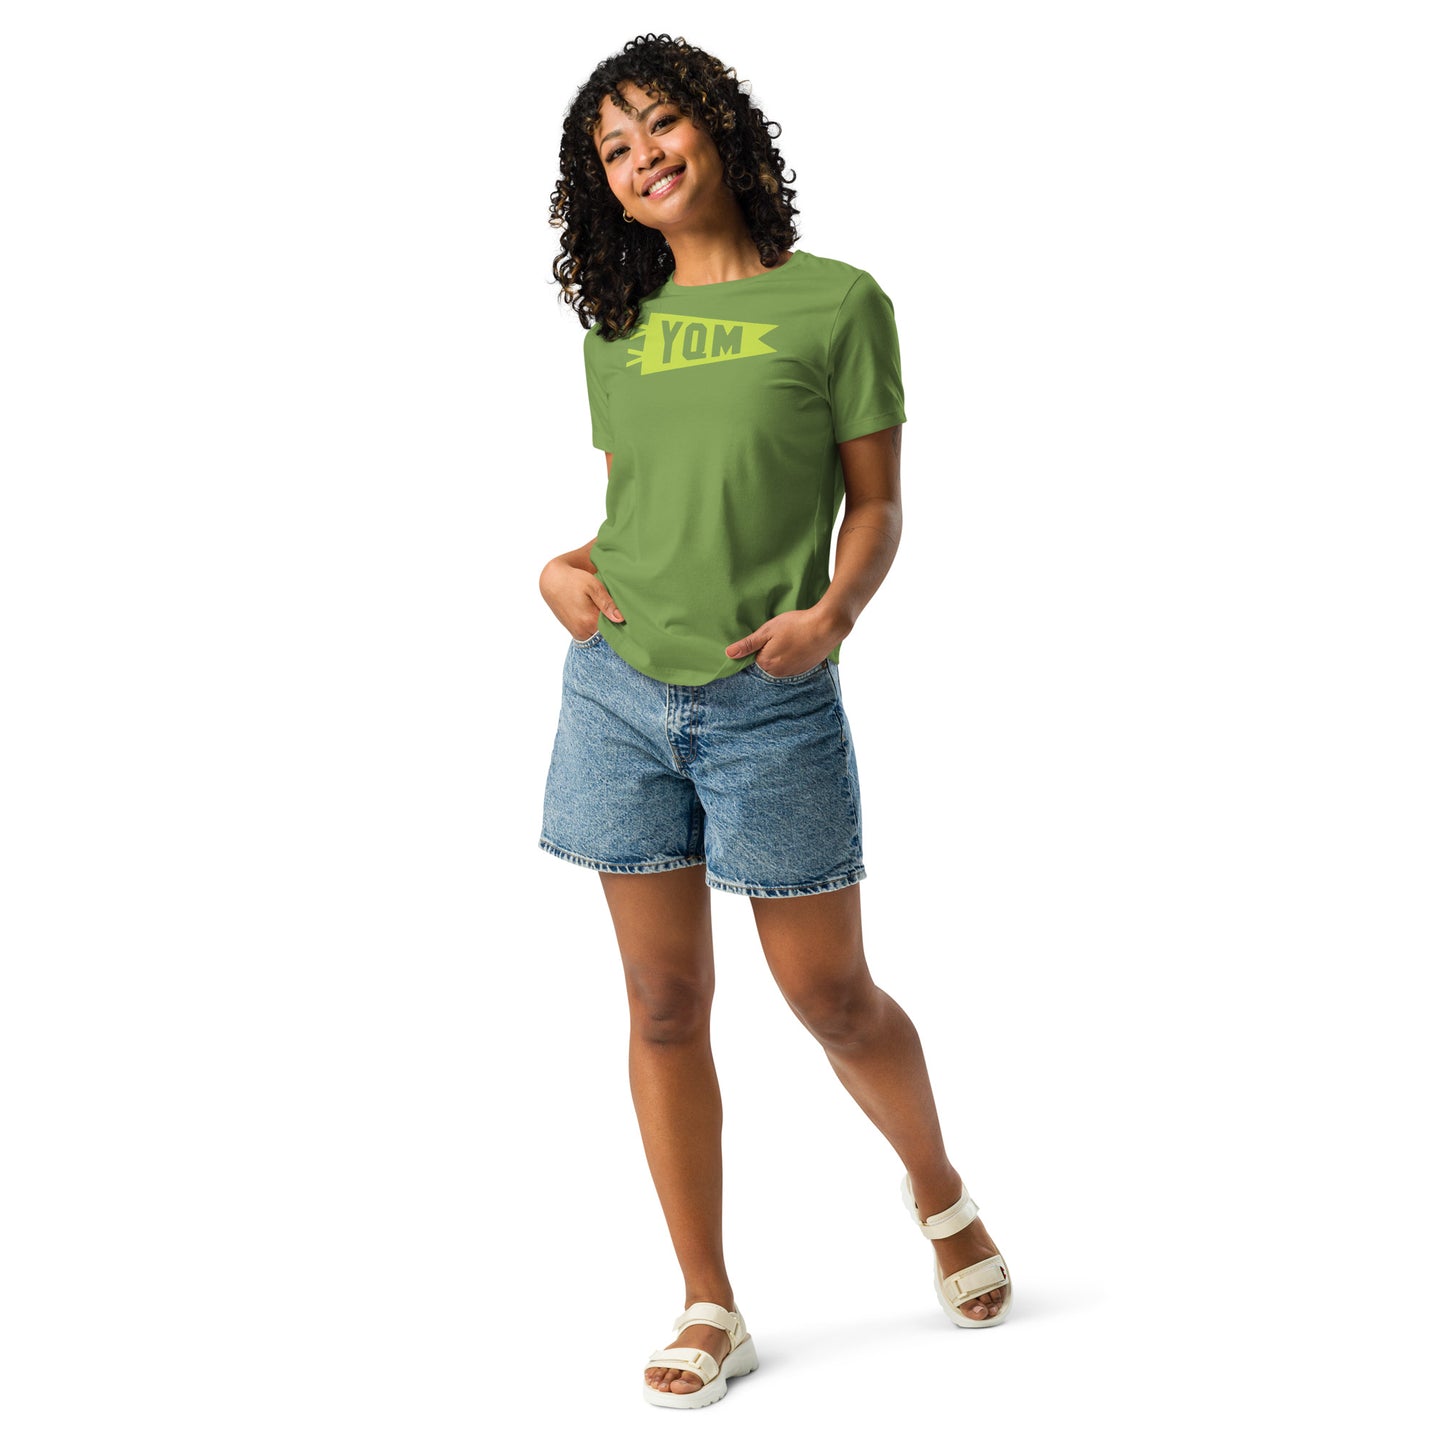 Airport Code Women's Tee - Green Graphic • YQM Moncton • YHM Designs - Image 08